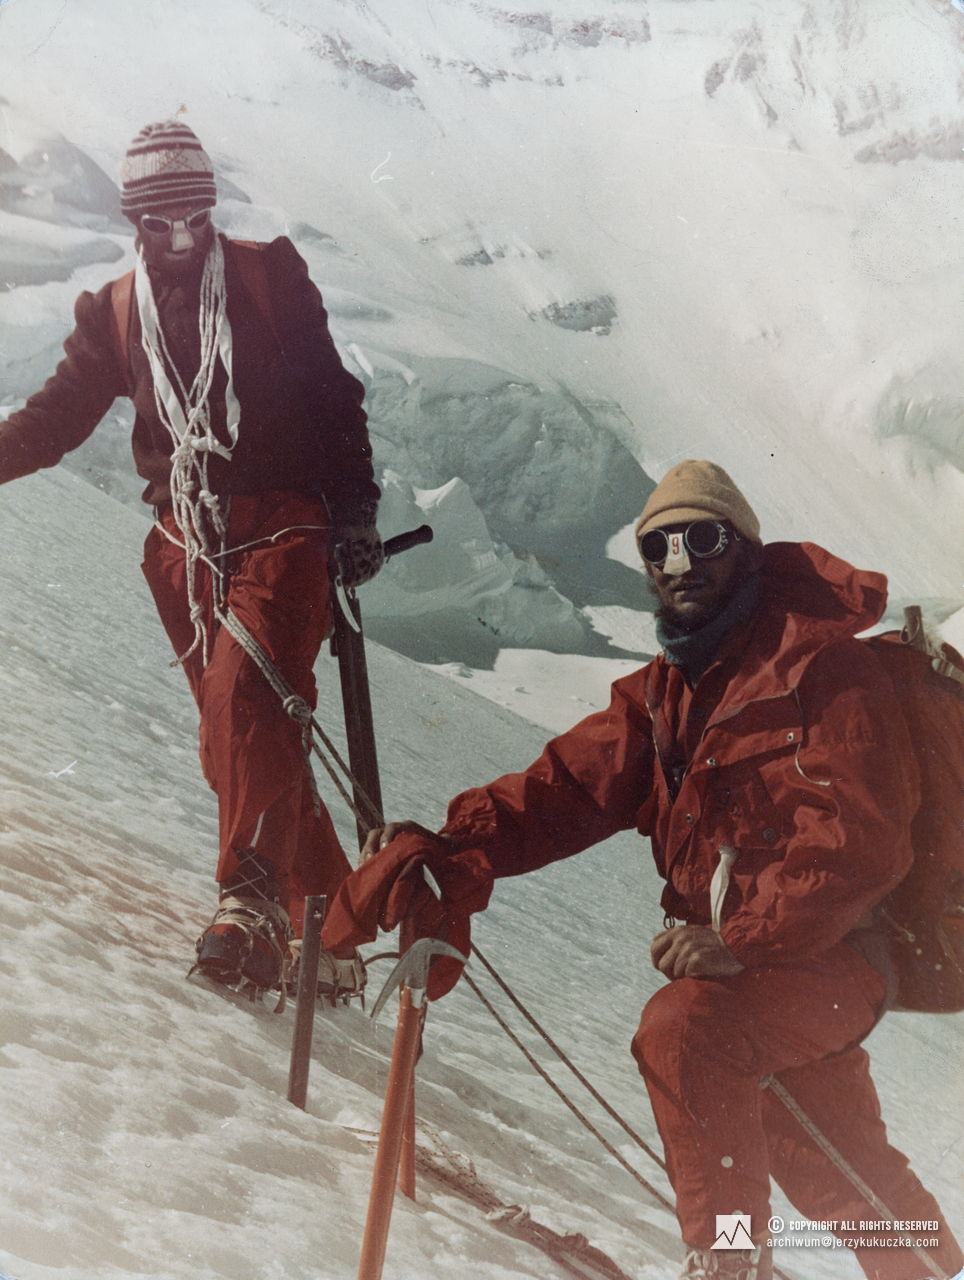 Participants of the expedition on the Lhotse slope. From the left: Janusz Skorek and Jerzy Kukuczka.